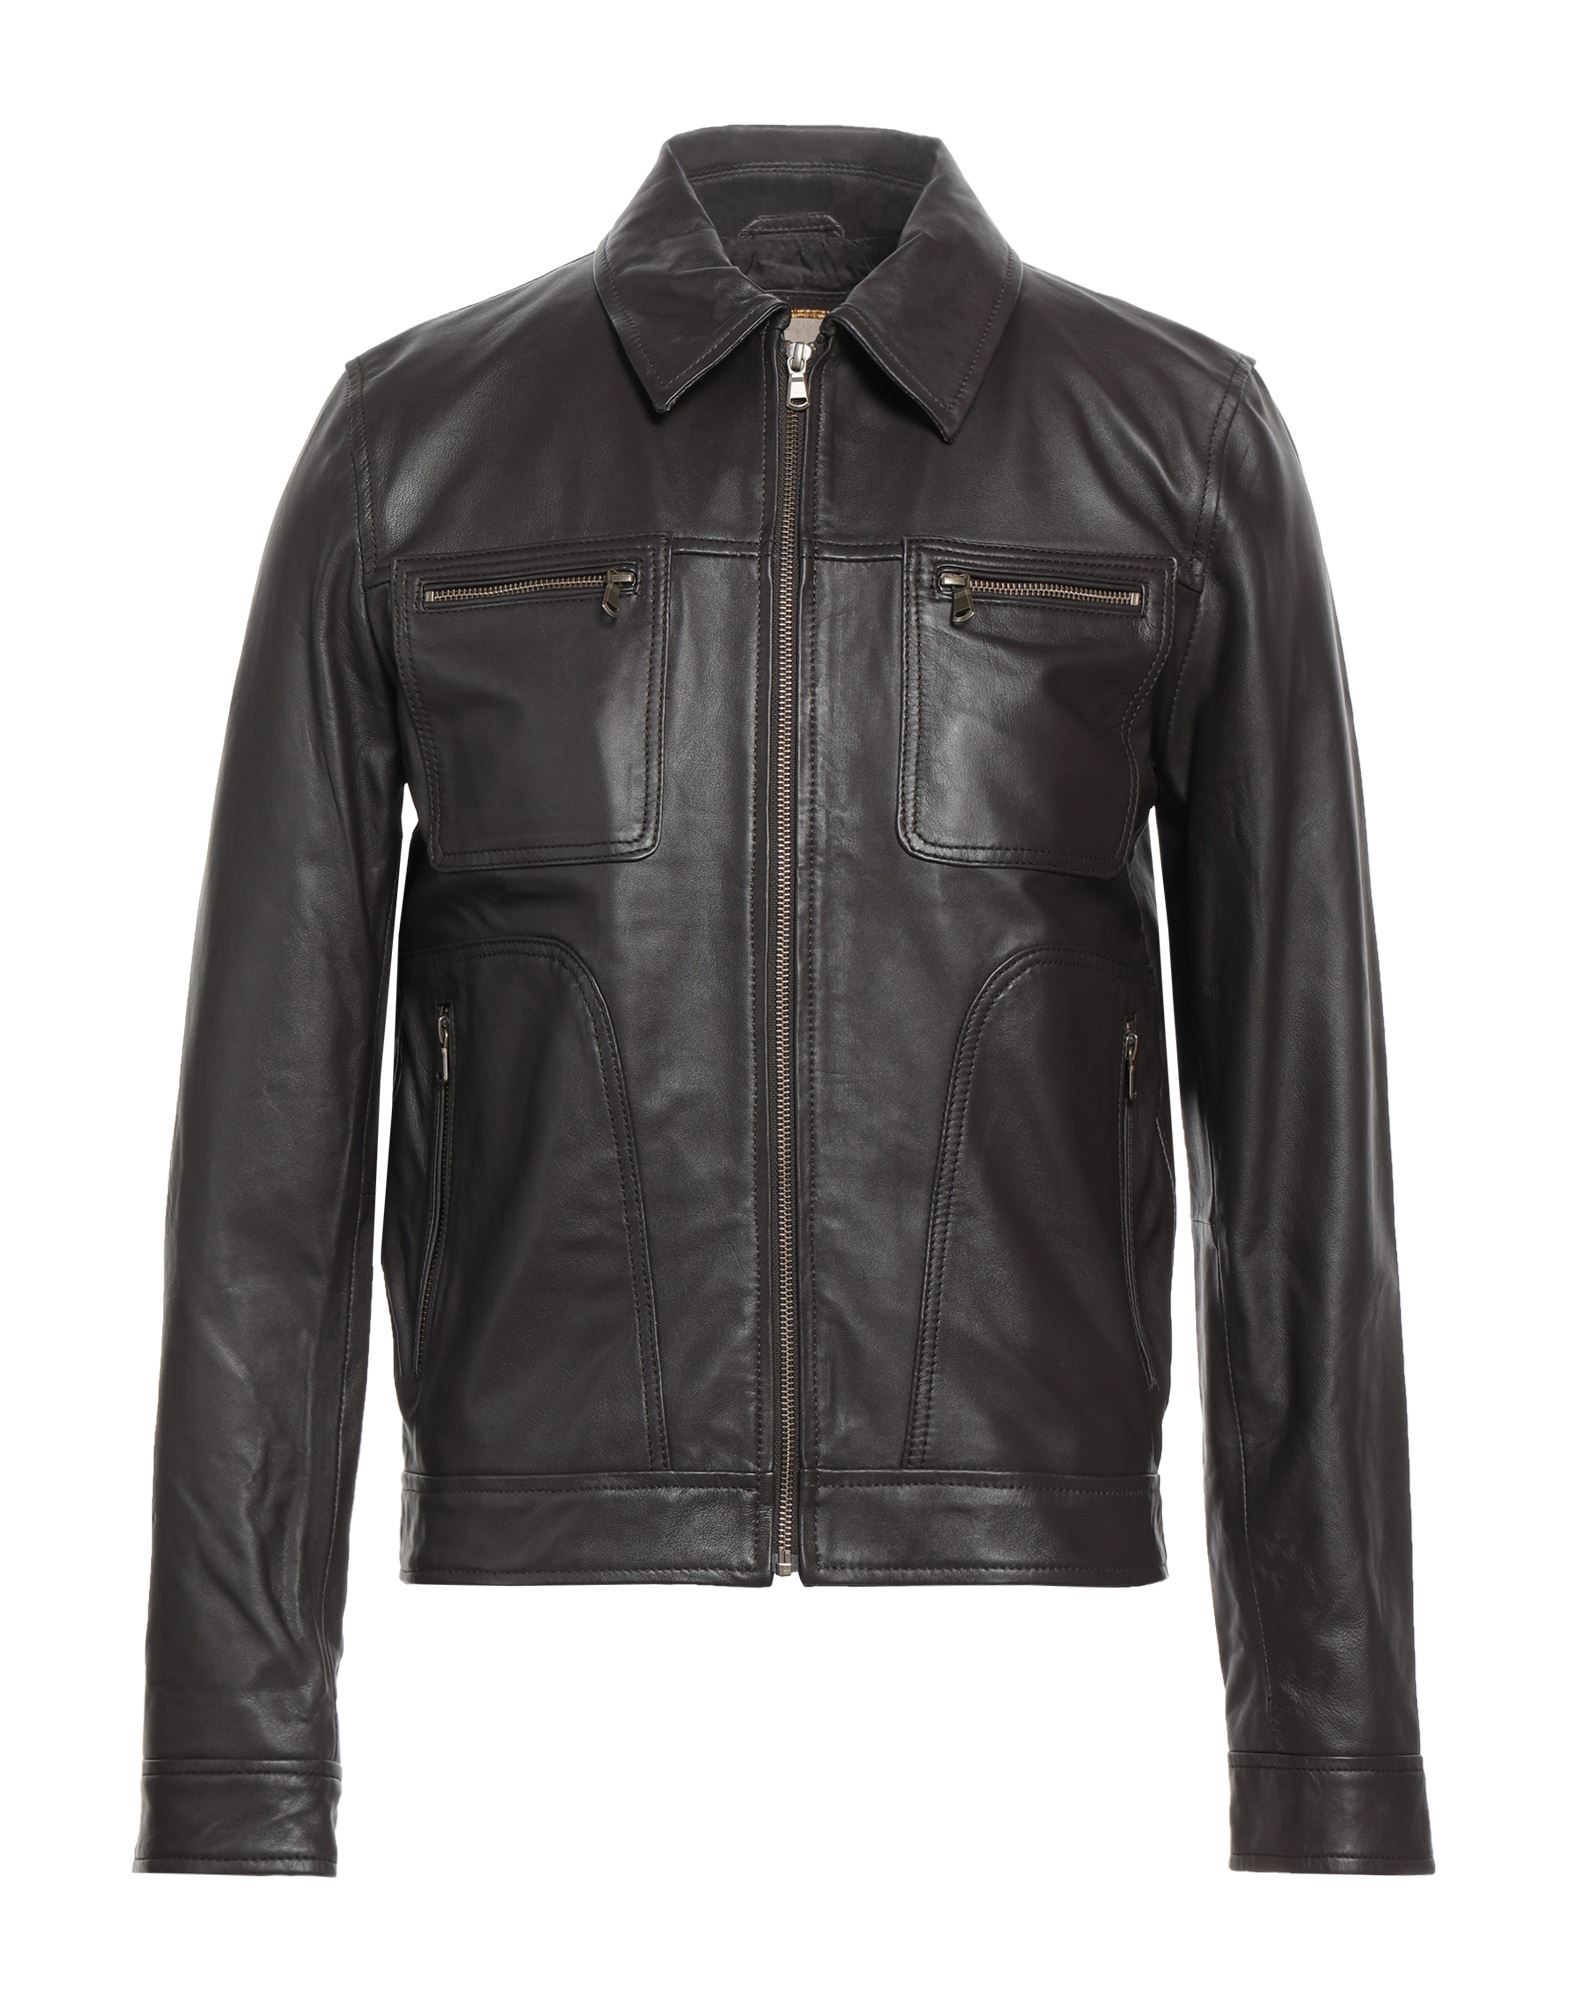 Andrea D'amico Man Jacket Dark Brown Size 48 Soft Leather